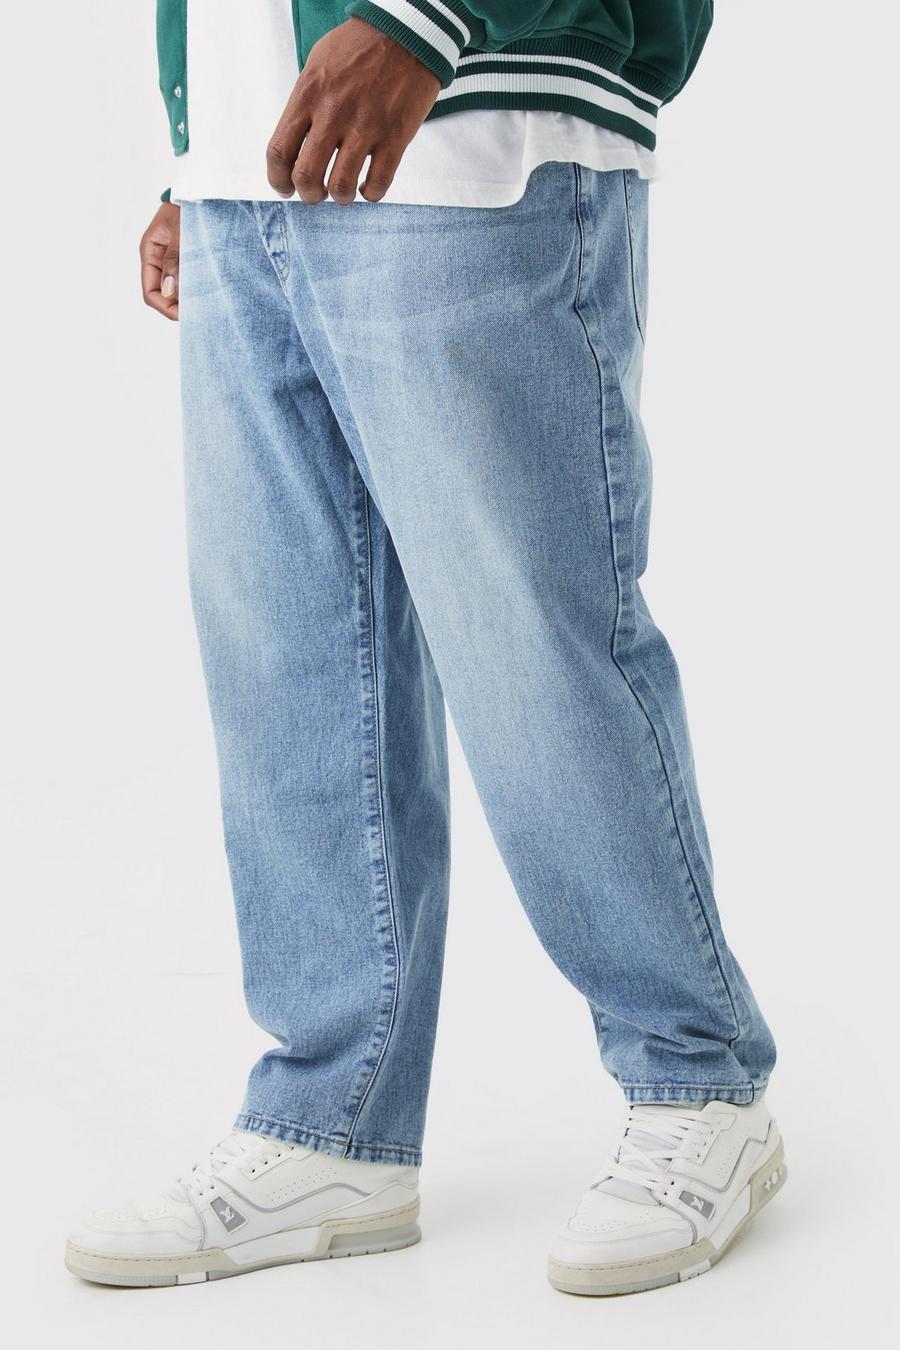 Light blue Jacob Cohen mid-rise fitted jeans